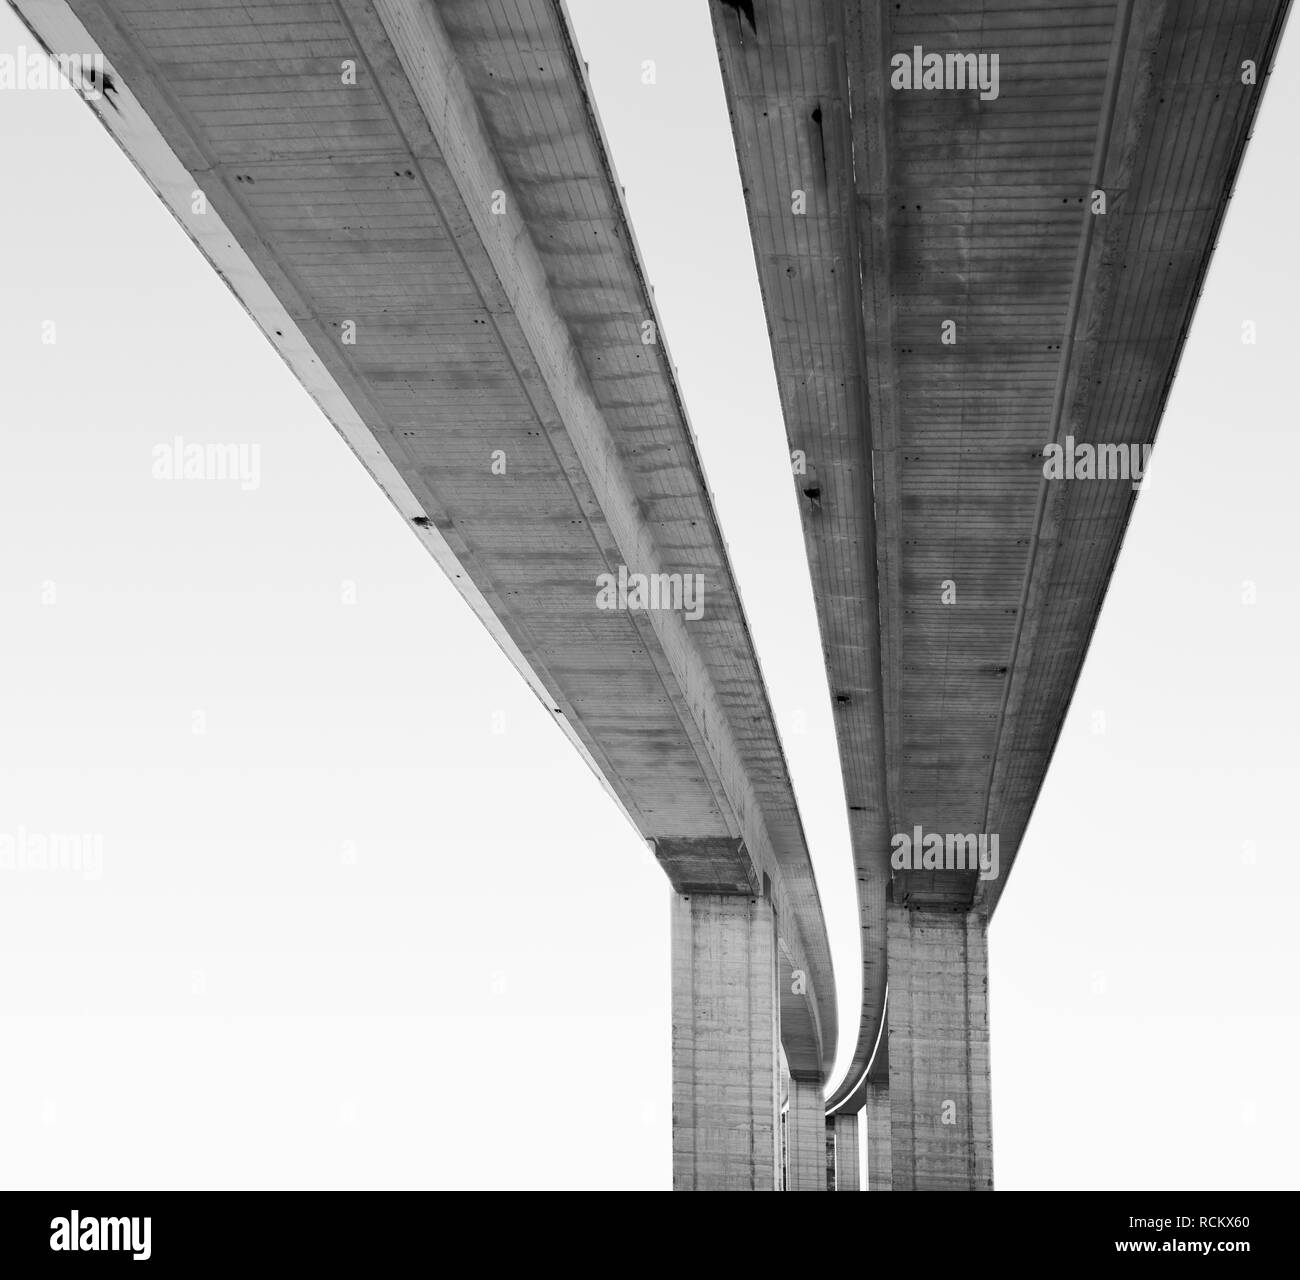 View from underneath large scale road bridge, black and white Stock Photo